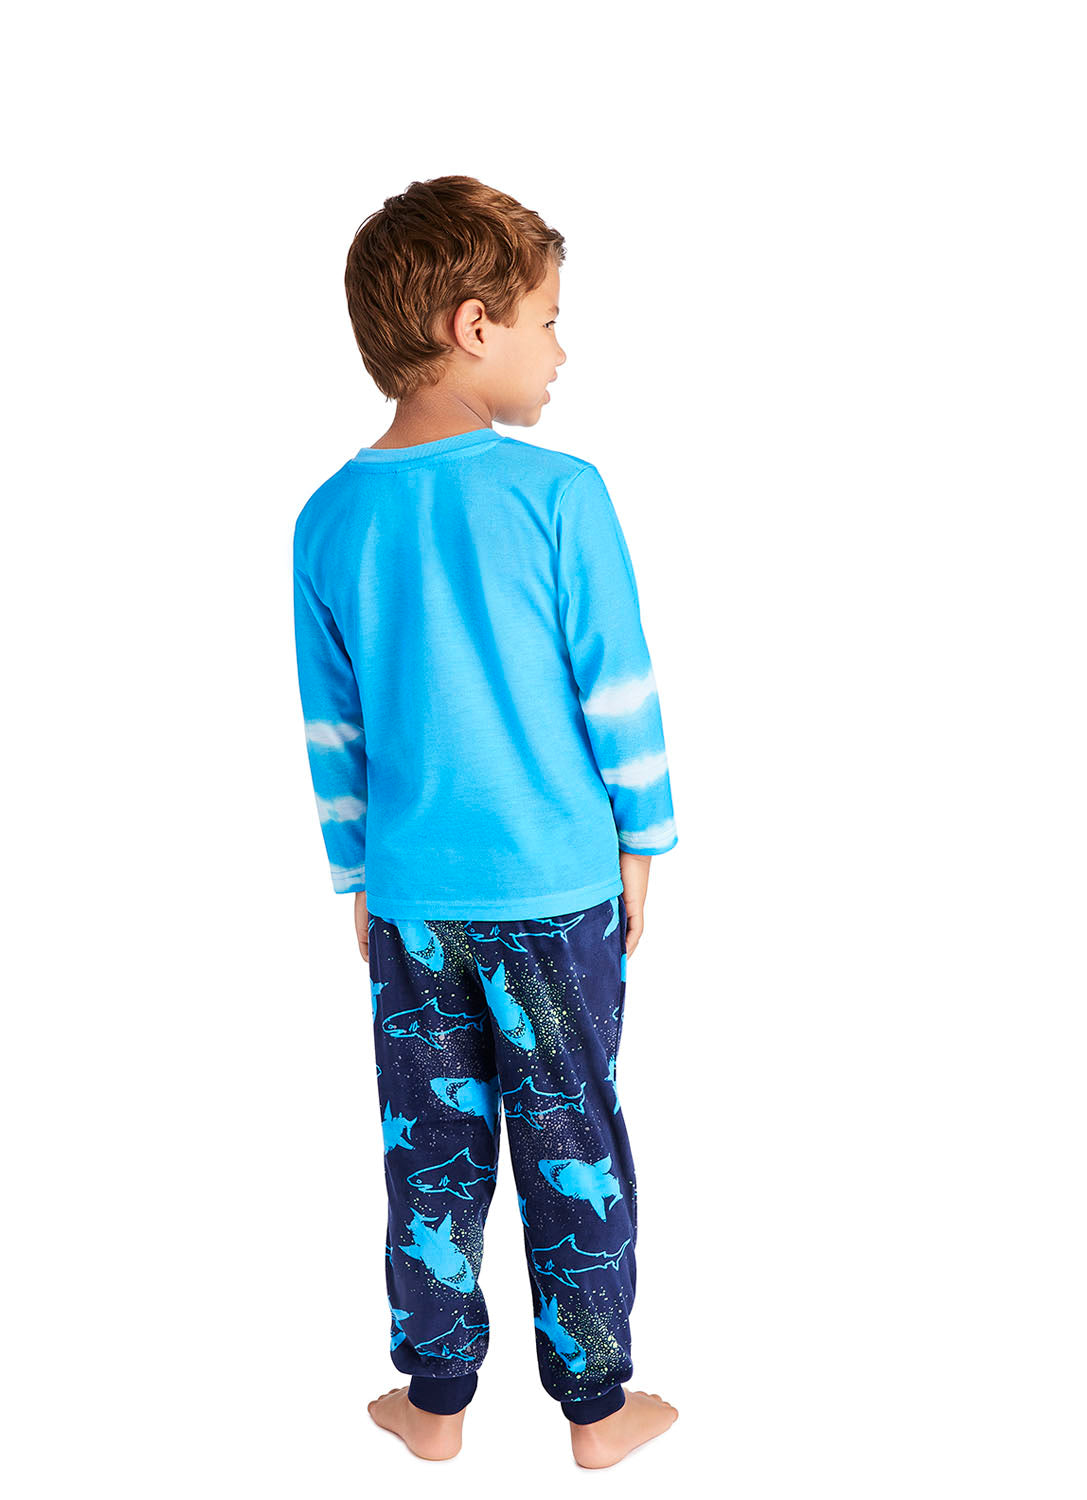 Back view Little boy wearing Pajama Set with Shark print in blue colour